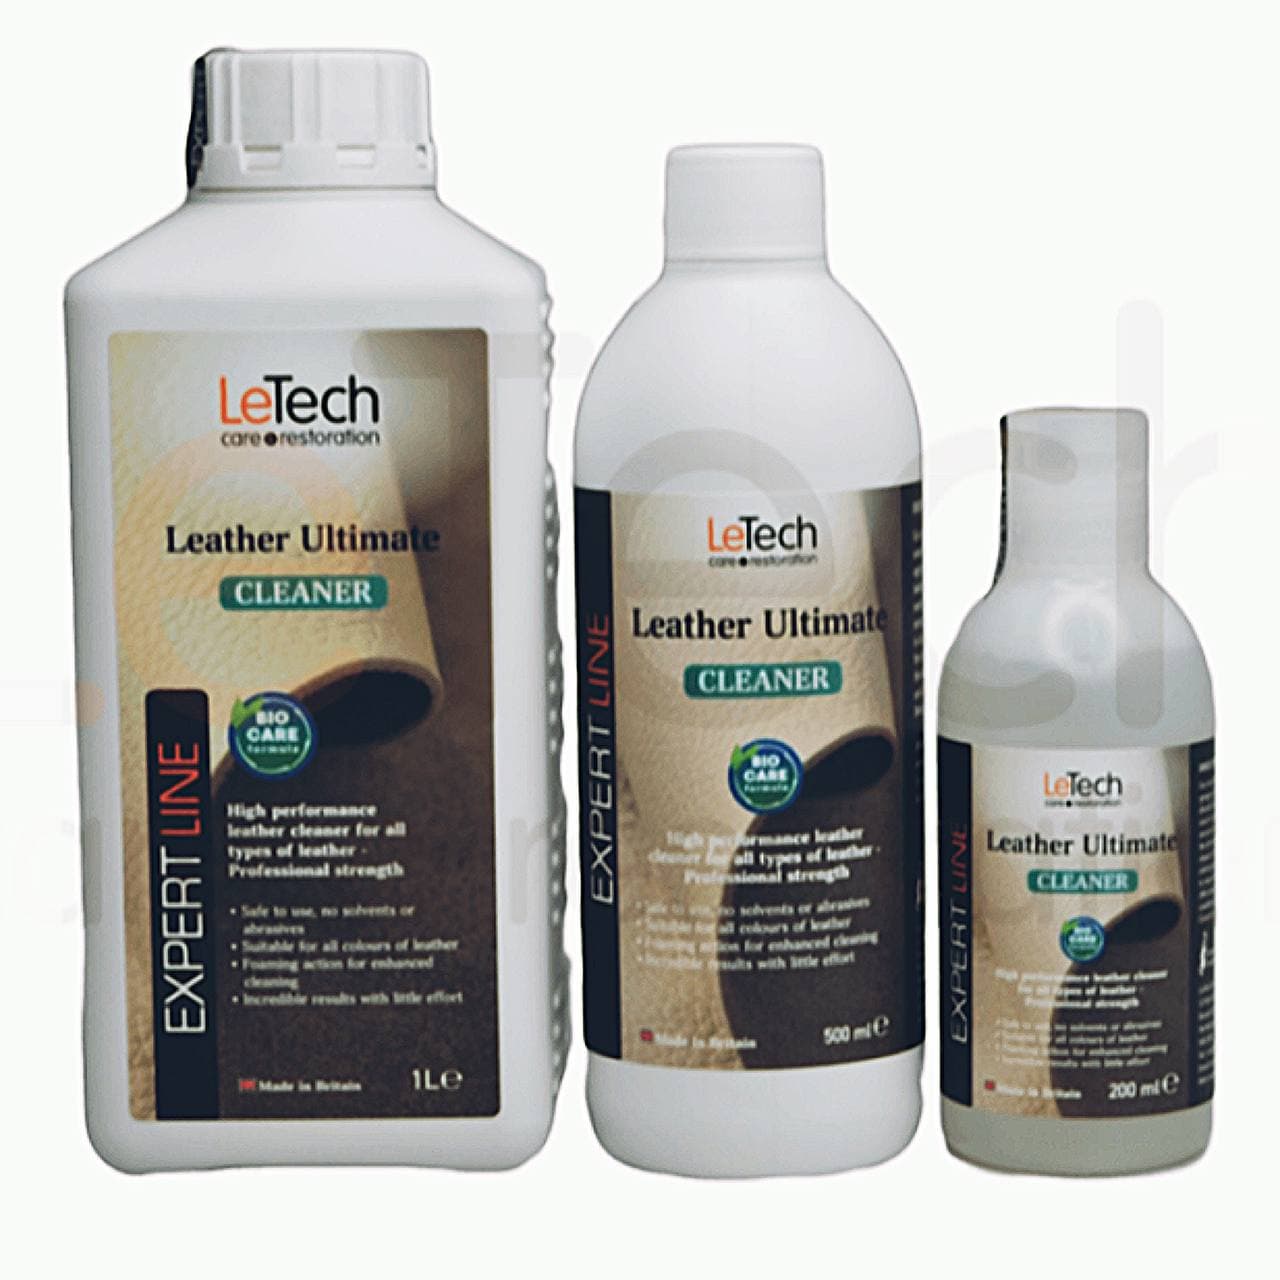 Какое средство для очистки кожи. Средство для чистки кожи Leather Ultimate Cleaner Biocare Formula. Letech Furniture Clinic Leather Ultra clean. Leather Ultimate Cleaner средство для чистки кожи letech, 500мл. Ultra clean letech для очистки кожи.